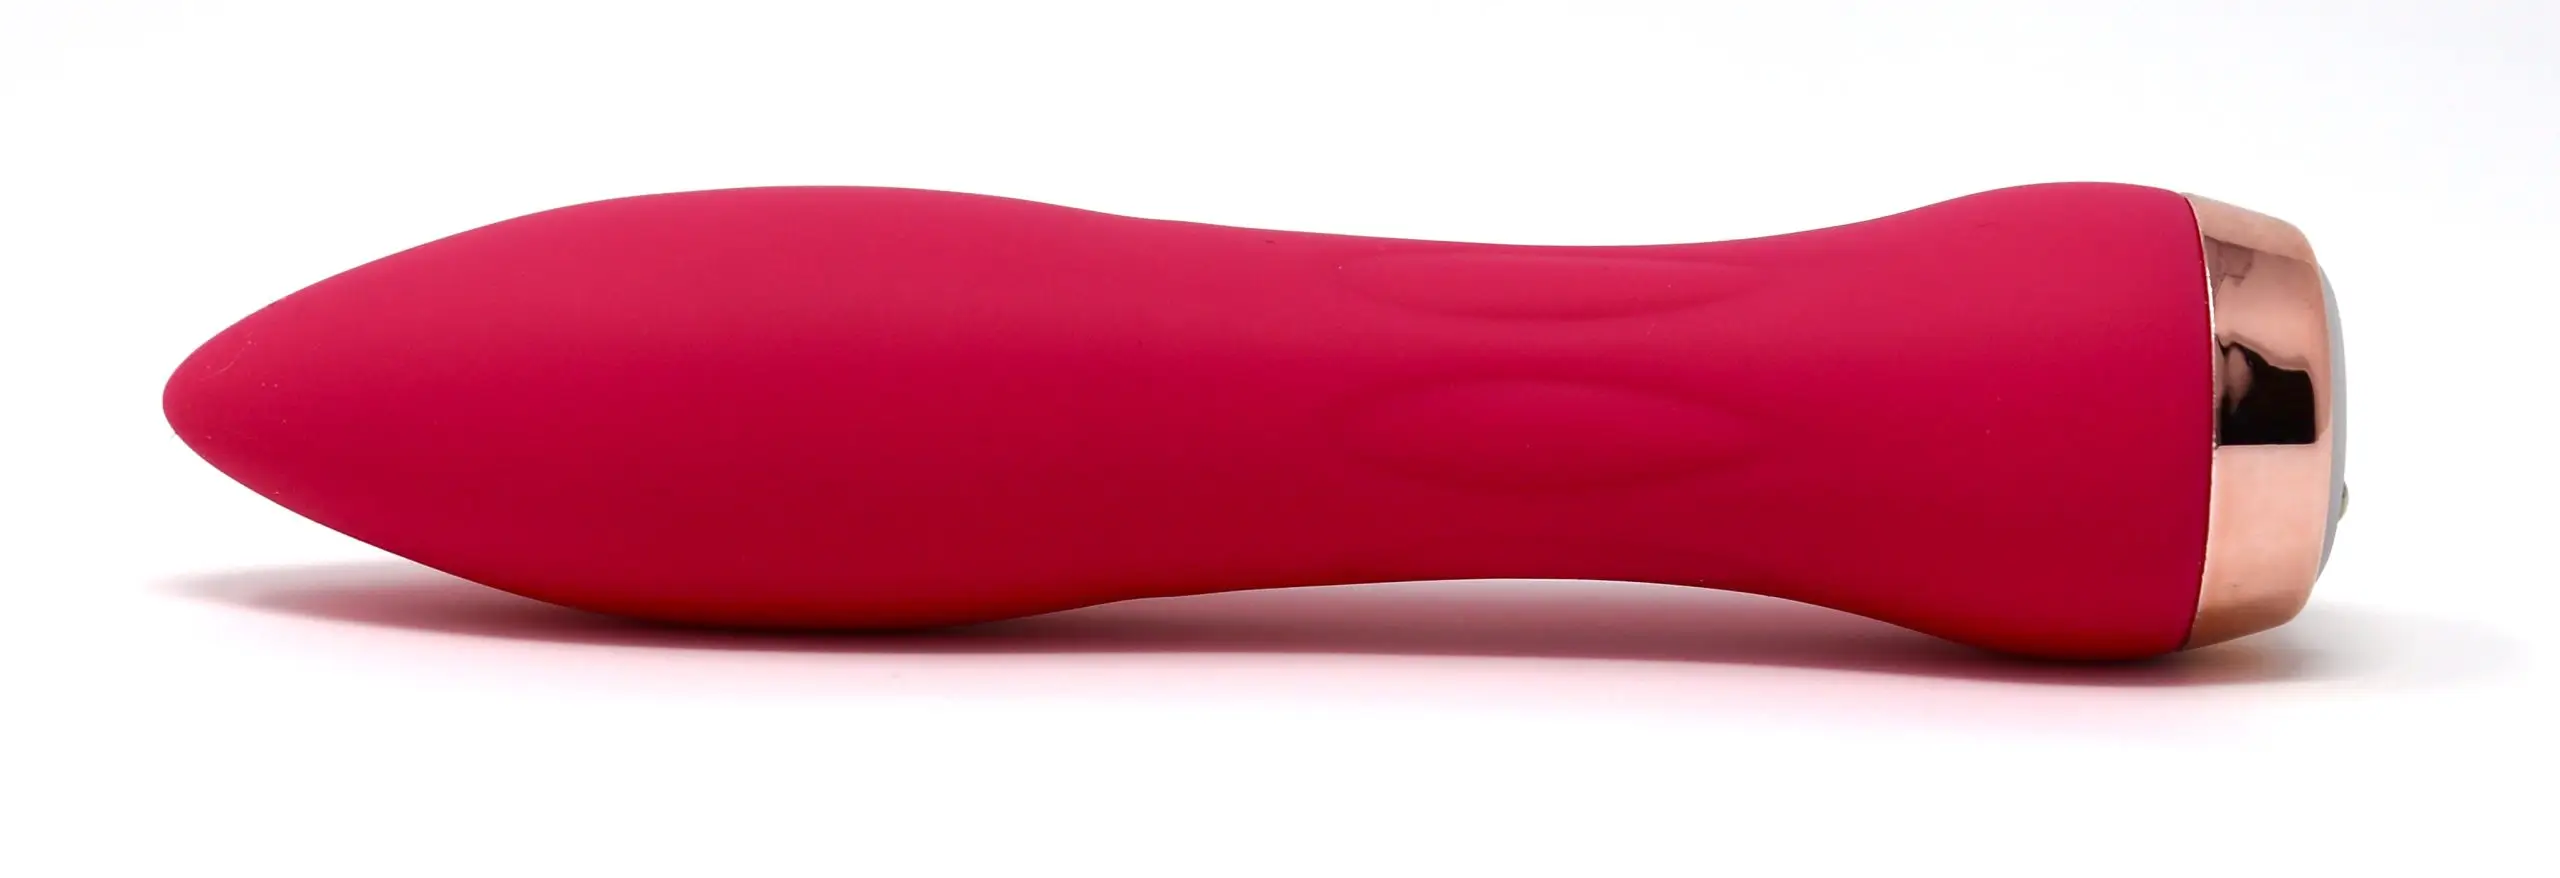 Jack and Jill Adult's Jackie Love bullet vibrator in pink